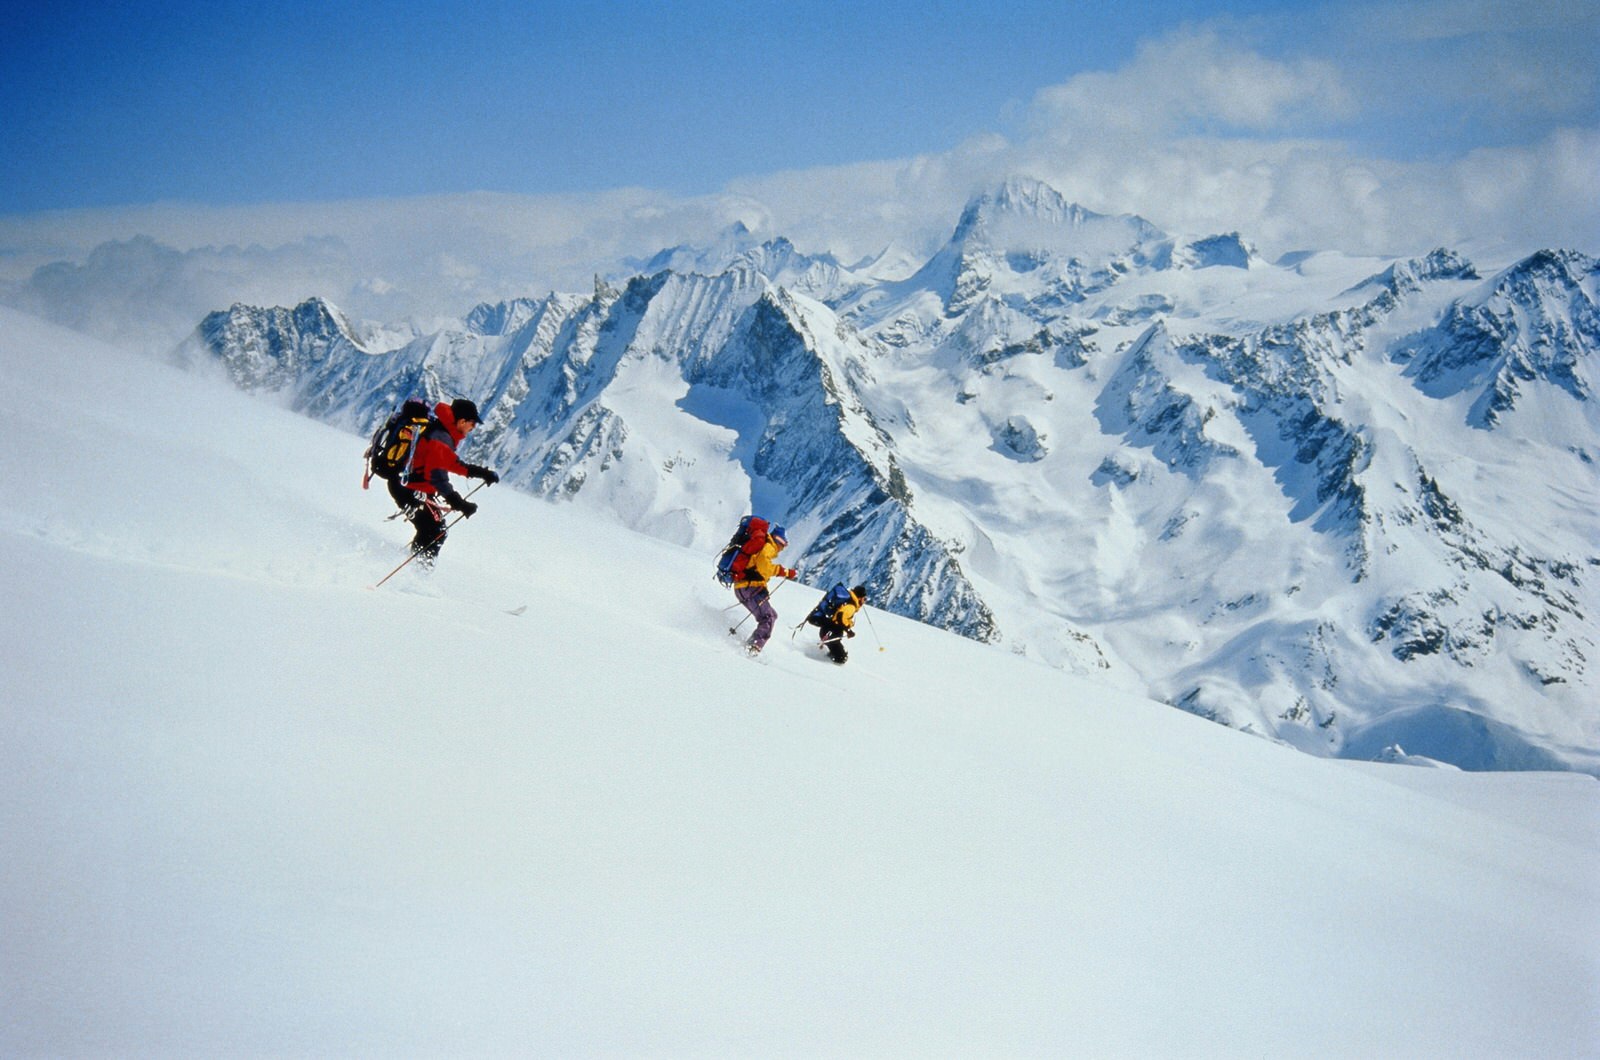 Three skiiers kitted out with backpacks ski through deep powder on a slope with mountain views in the distance